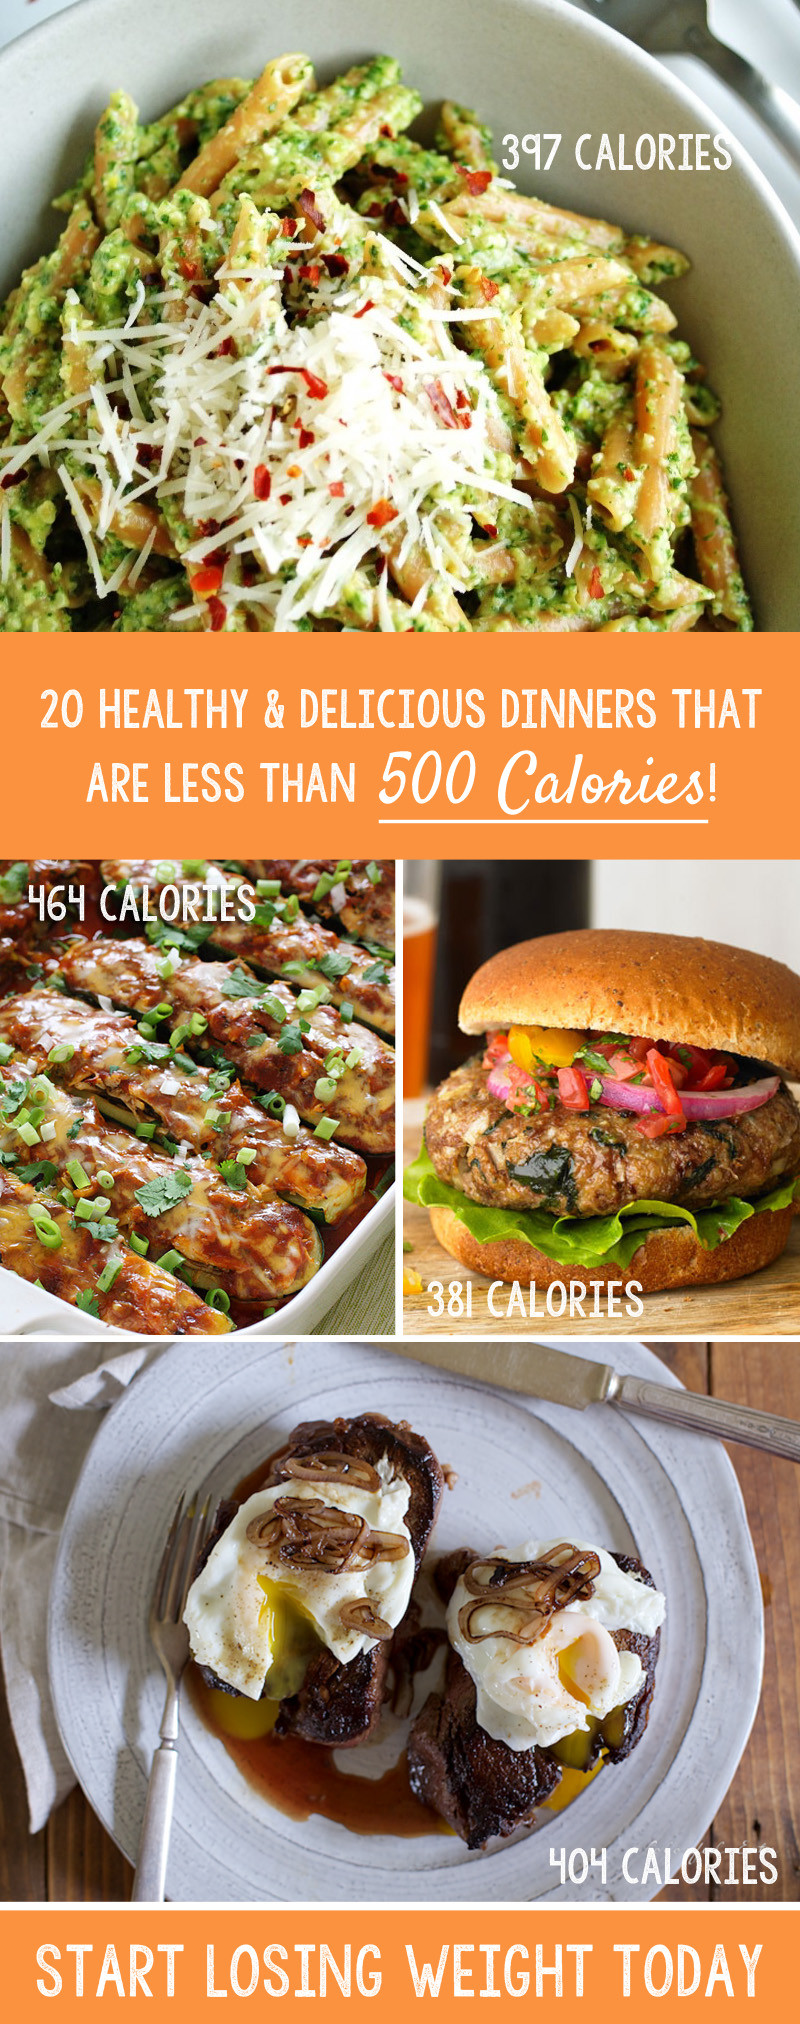 Healthy Low Calorie Dinners
 Low Calorie Specials – 20 Healthy & Delicious Dinners Less